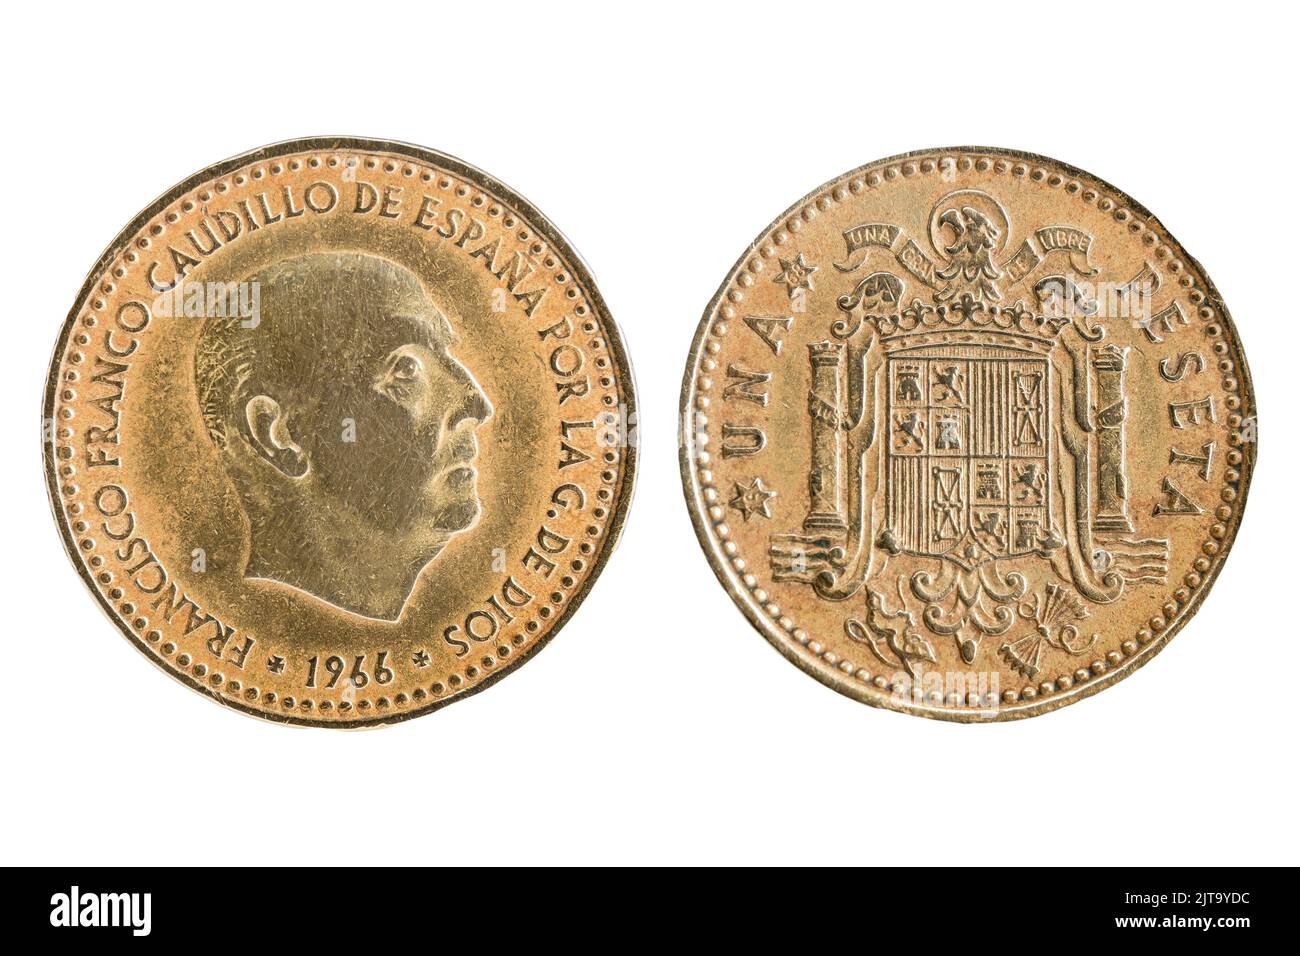 One ( 1 ) peseta coin from Spain with the sphinx of Francisco Franco and the falangist coat of arms Stock Photo